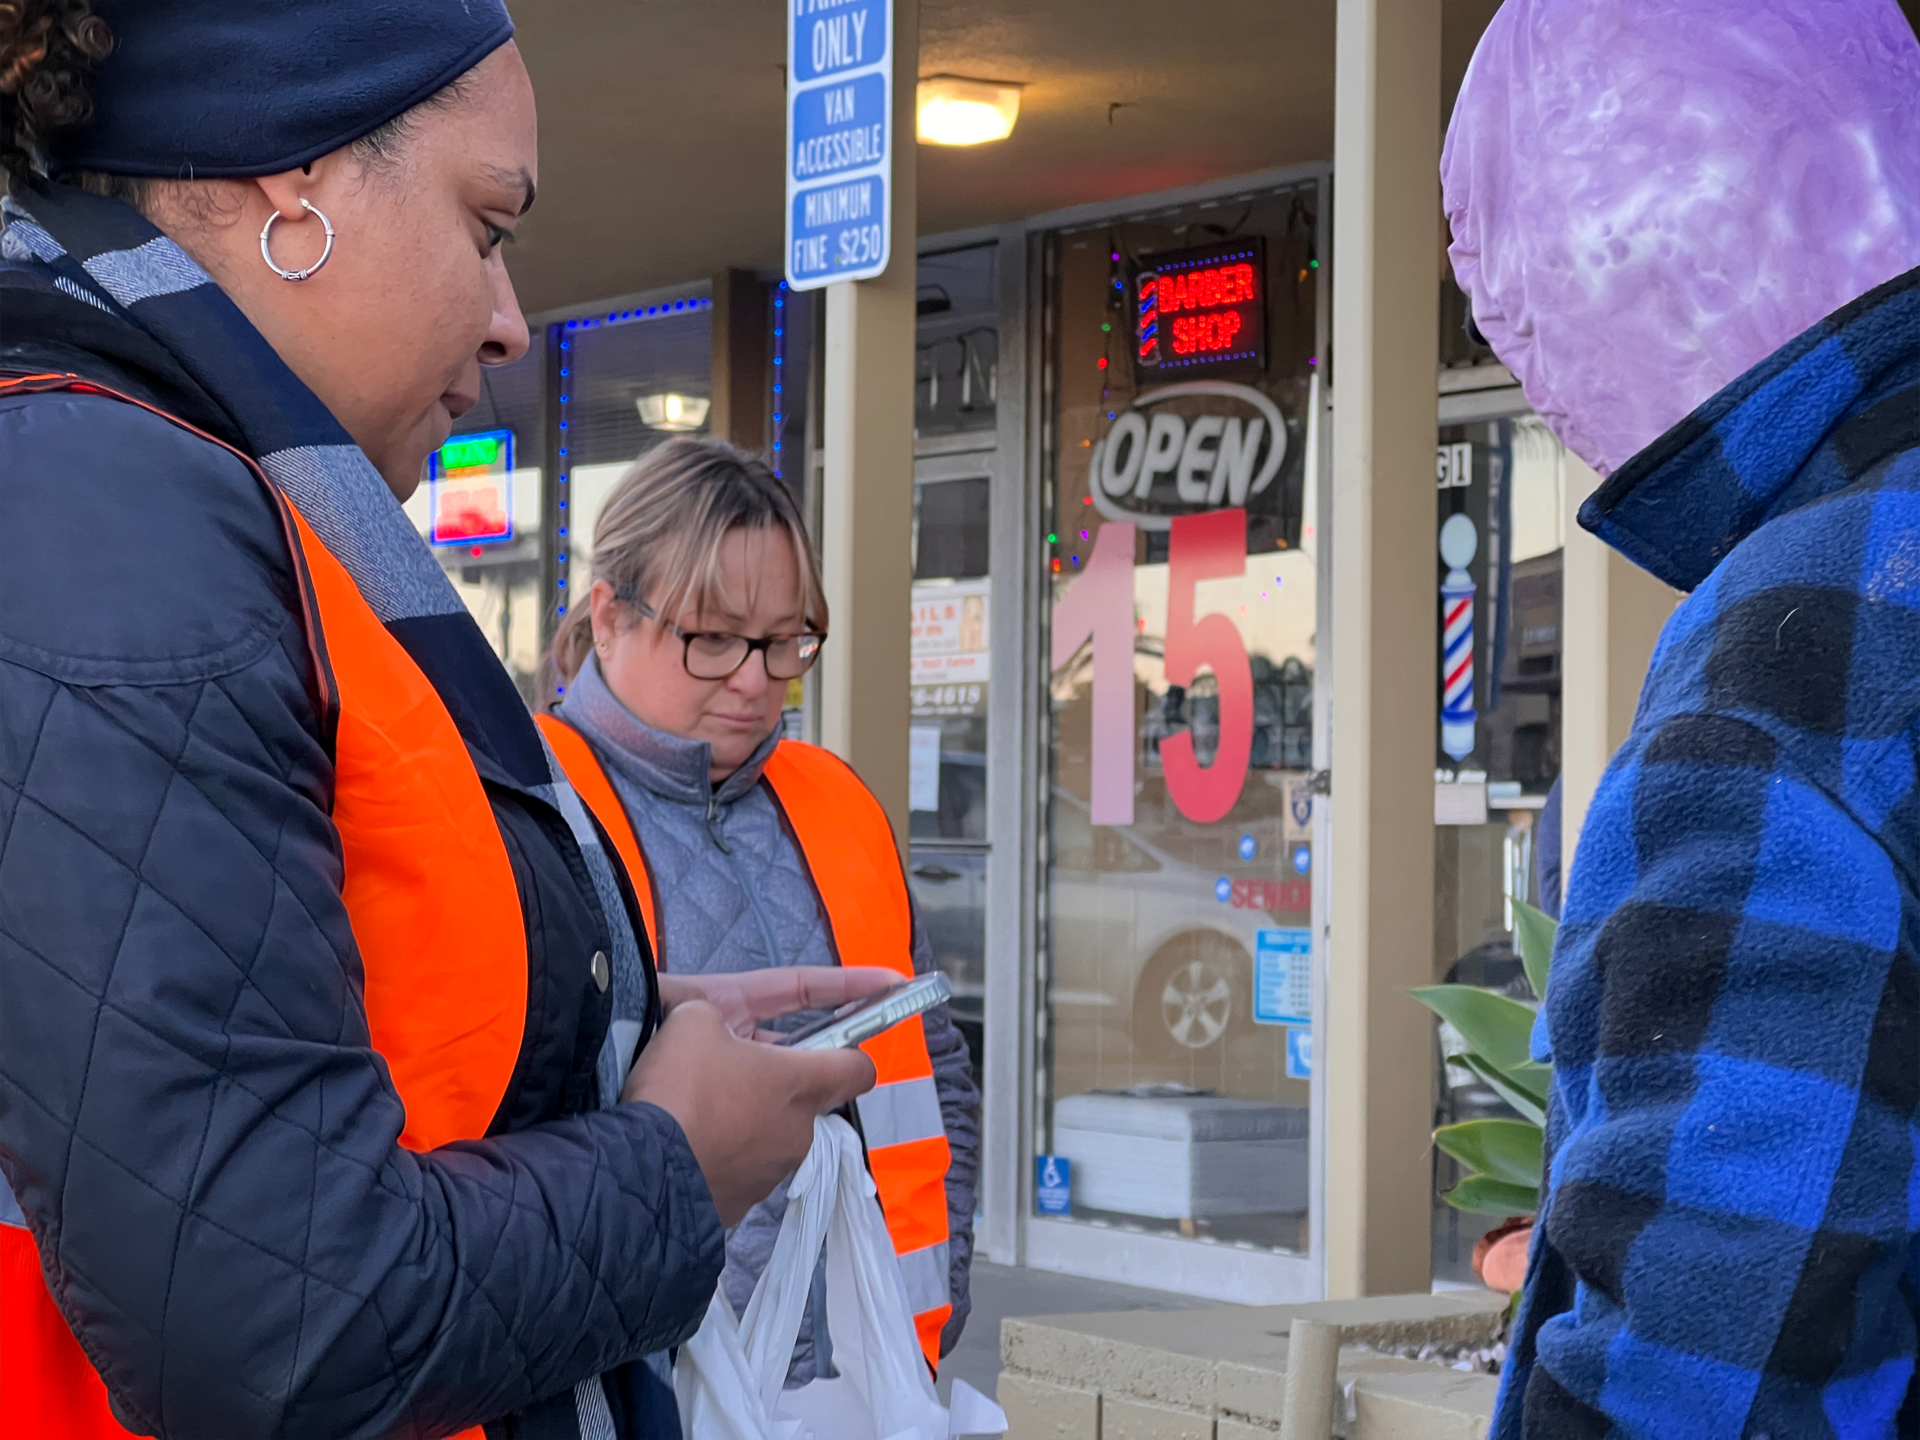 Point in Time Volunteers speak with person experiencing homelessness.